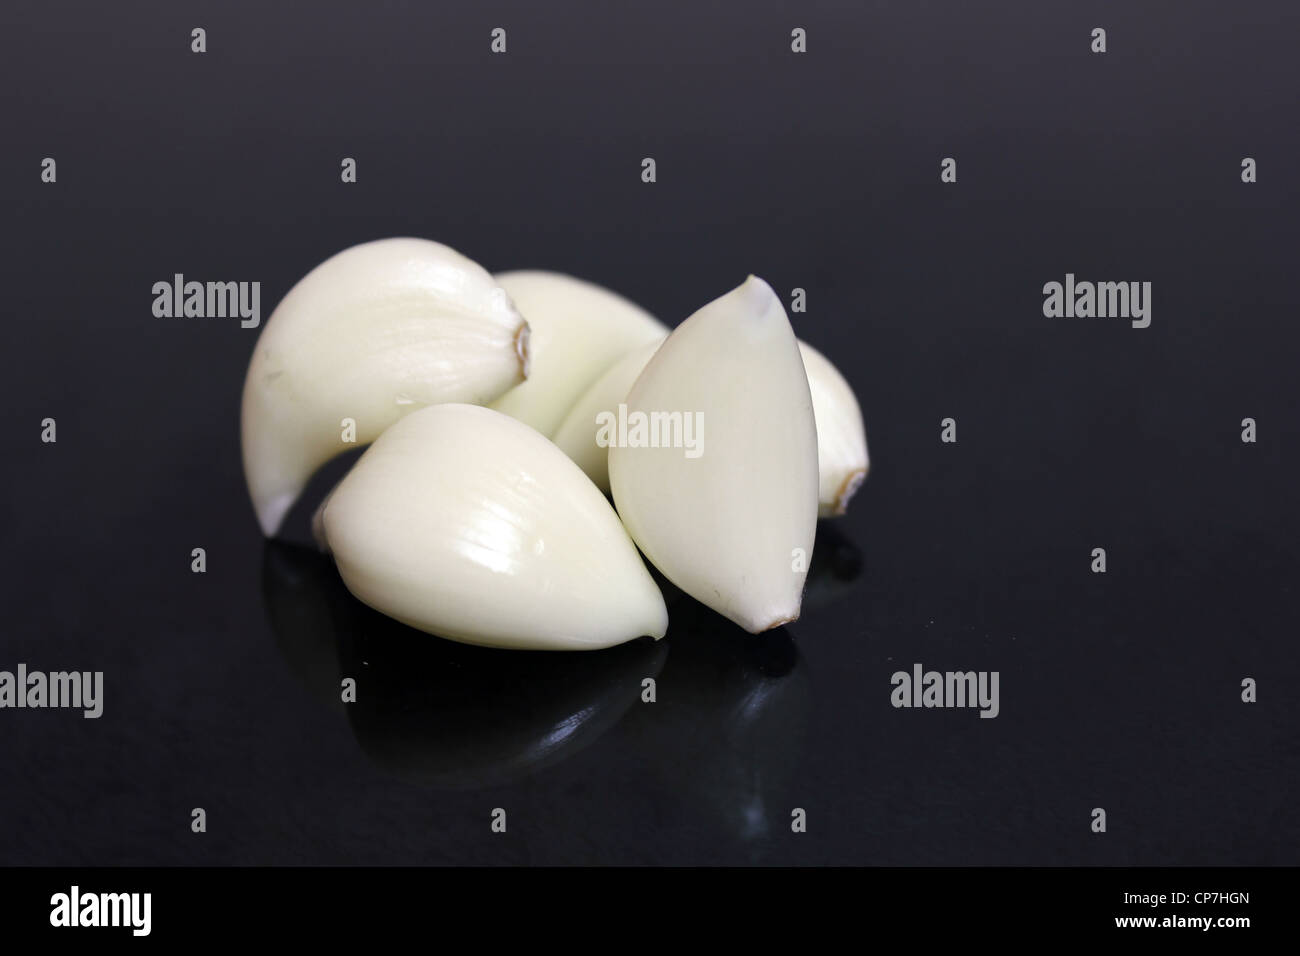 Garlic (Allium sativum) cloves separated from the bulb in black background Stock Photo